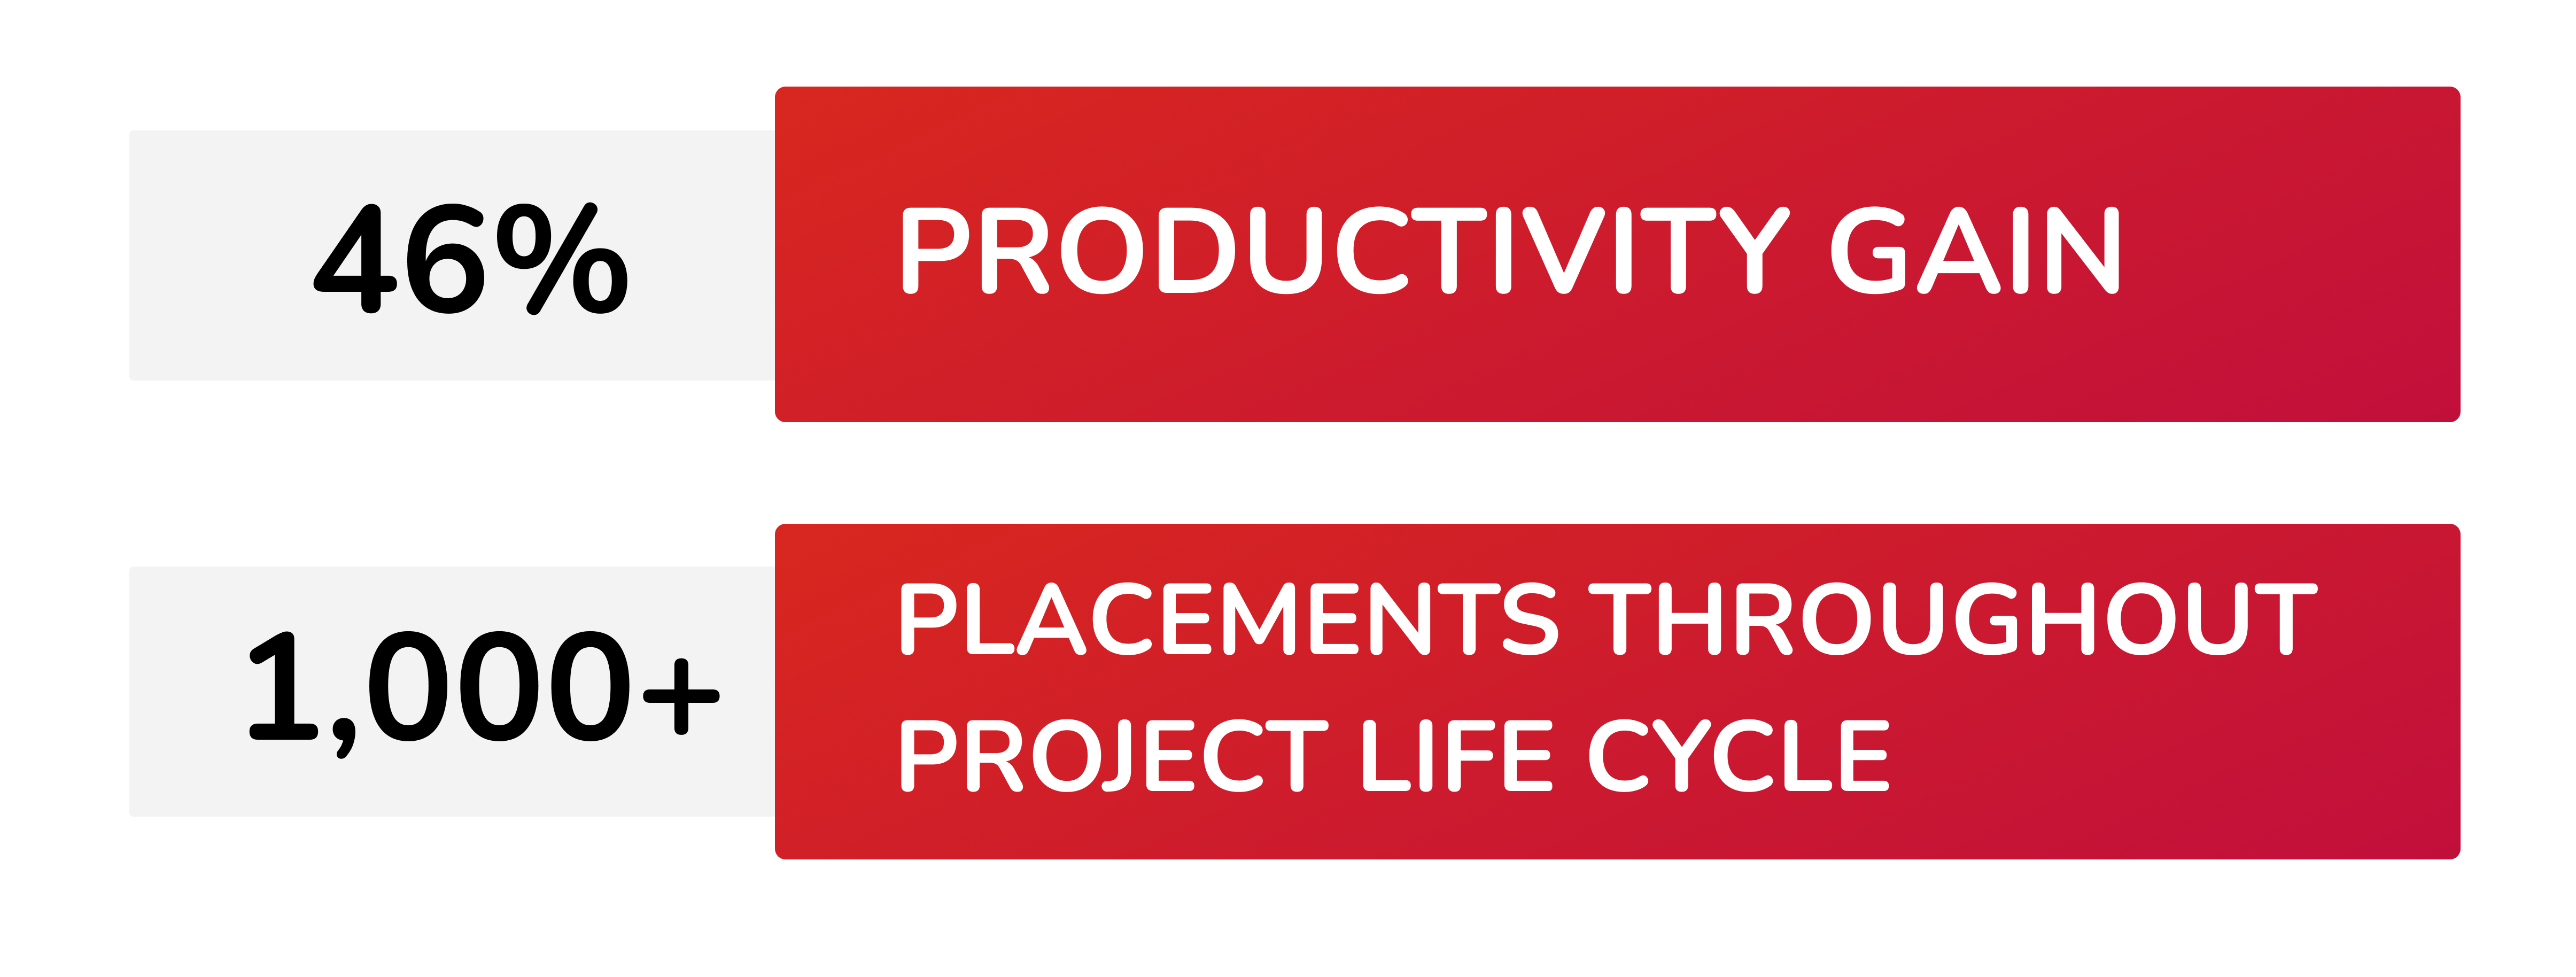 46% Productivity gain; 1,000+ Placements throughout project life cycle